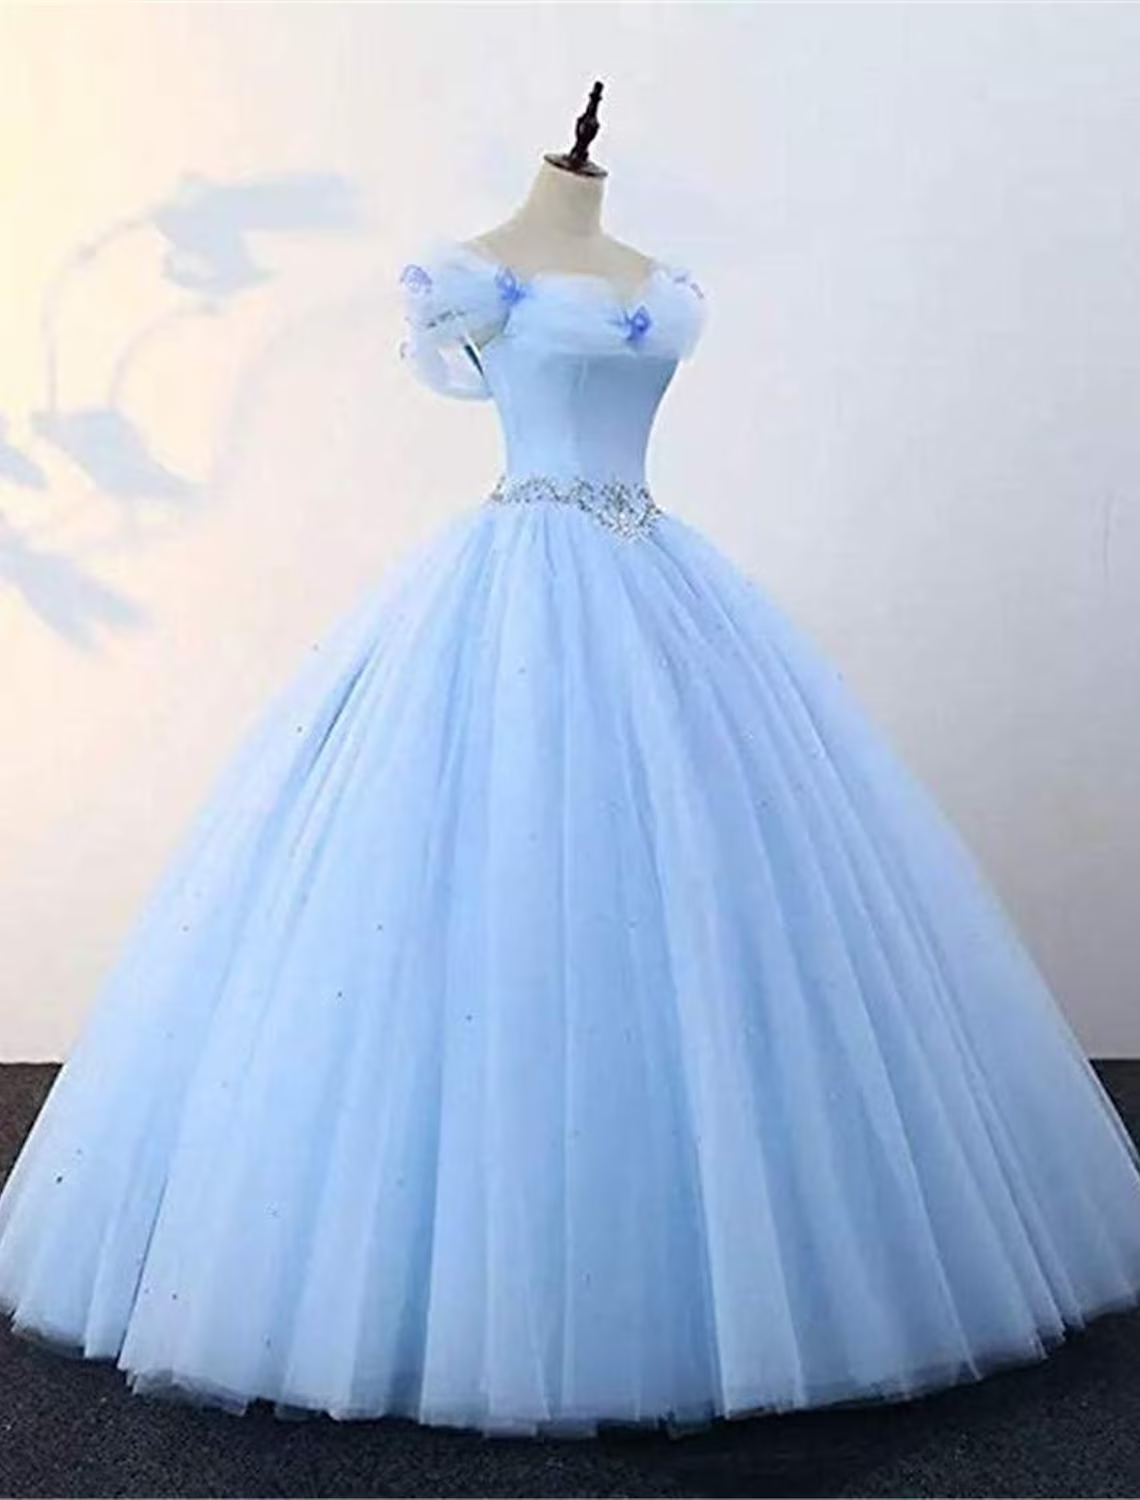 Ball Gown Prom Dresses Princess Dress Graduation Floor Length Sleeveless Off Shoulder Tulle with Pearls Beading Butterfly